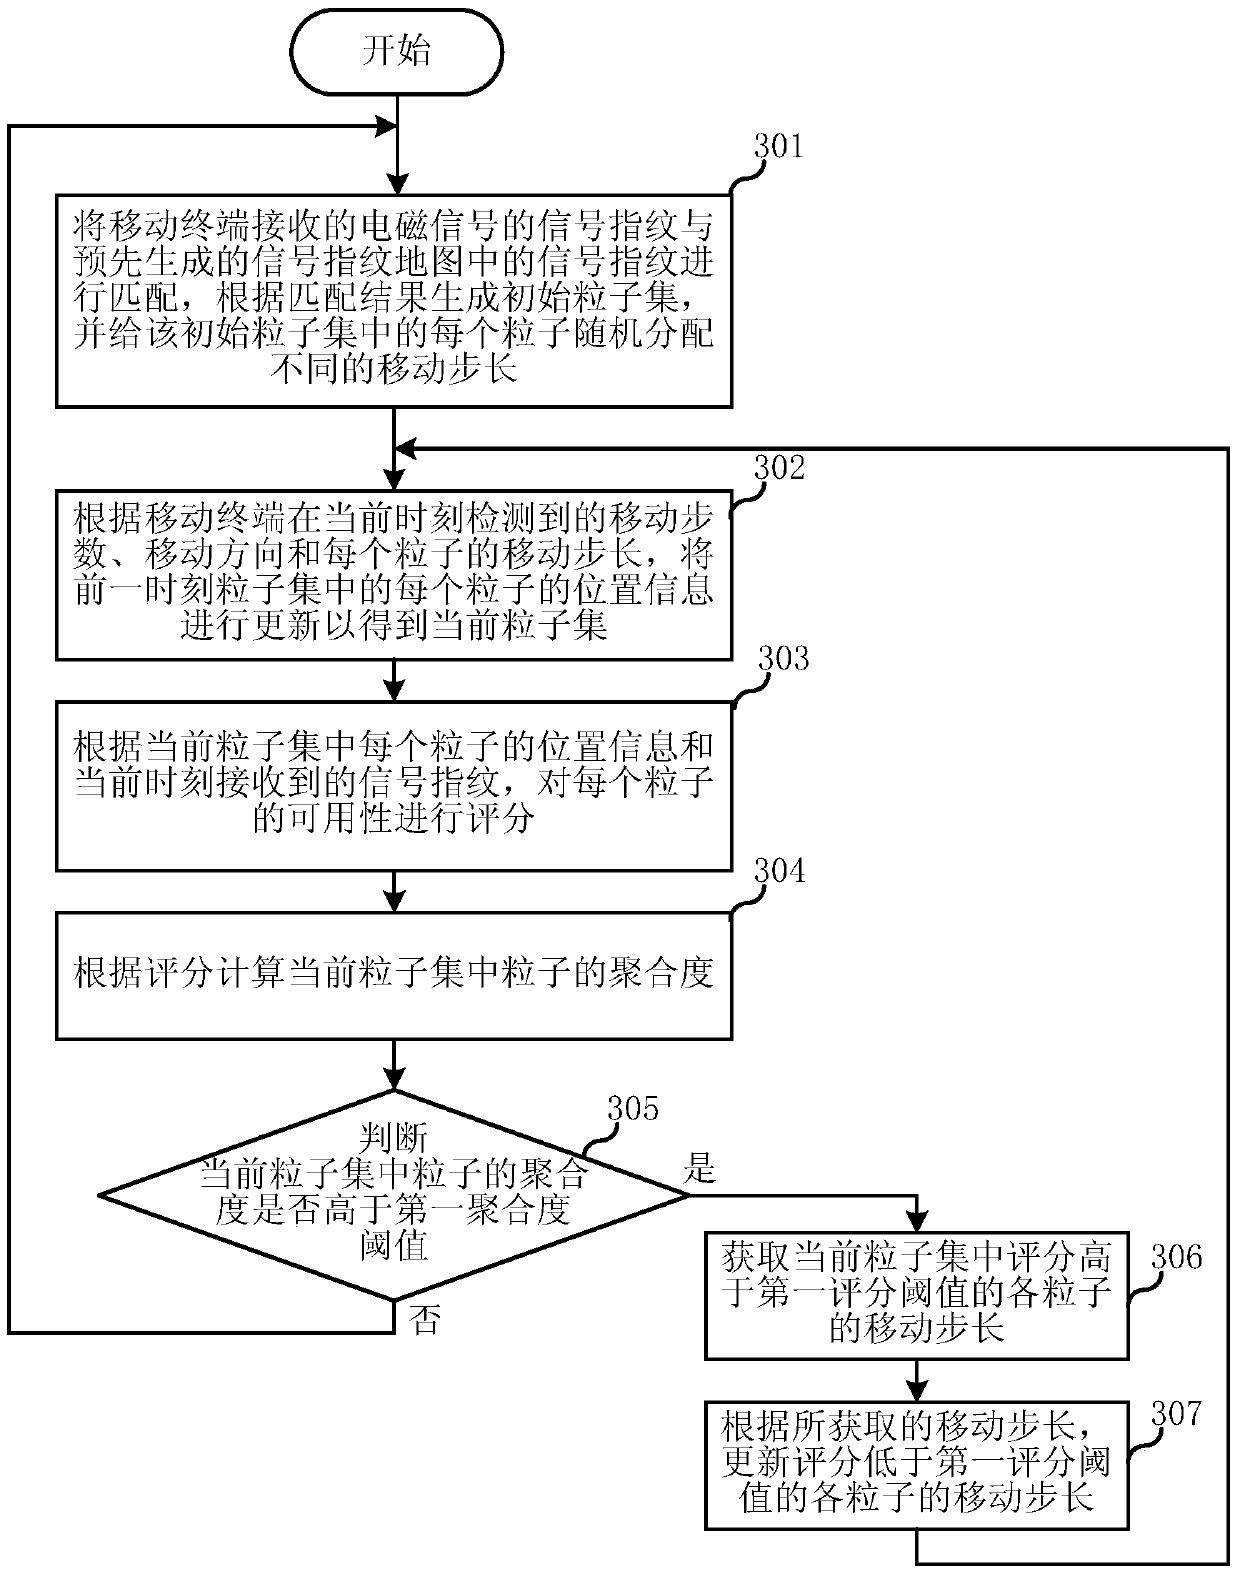 Mobile terminal positioning method and device based on electromagnetic signals